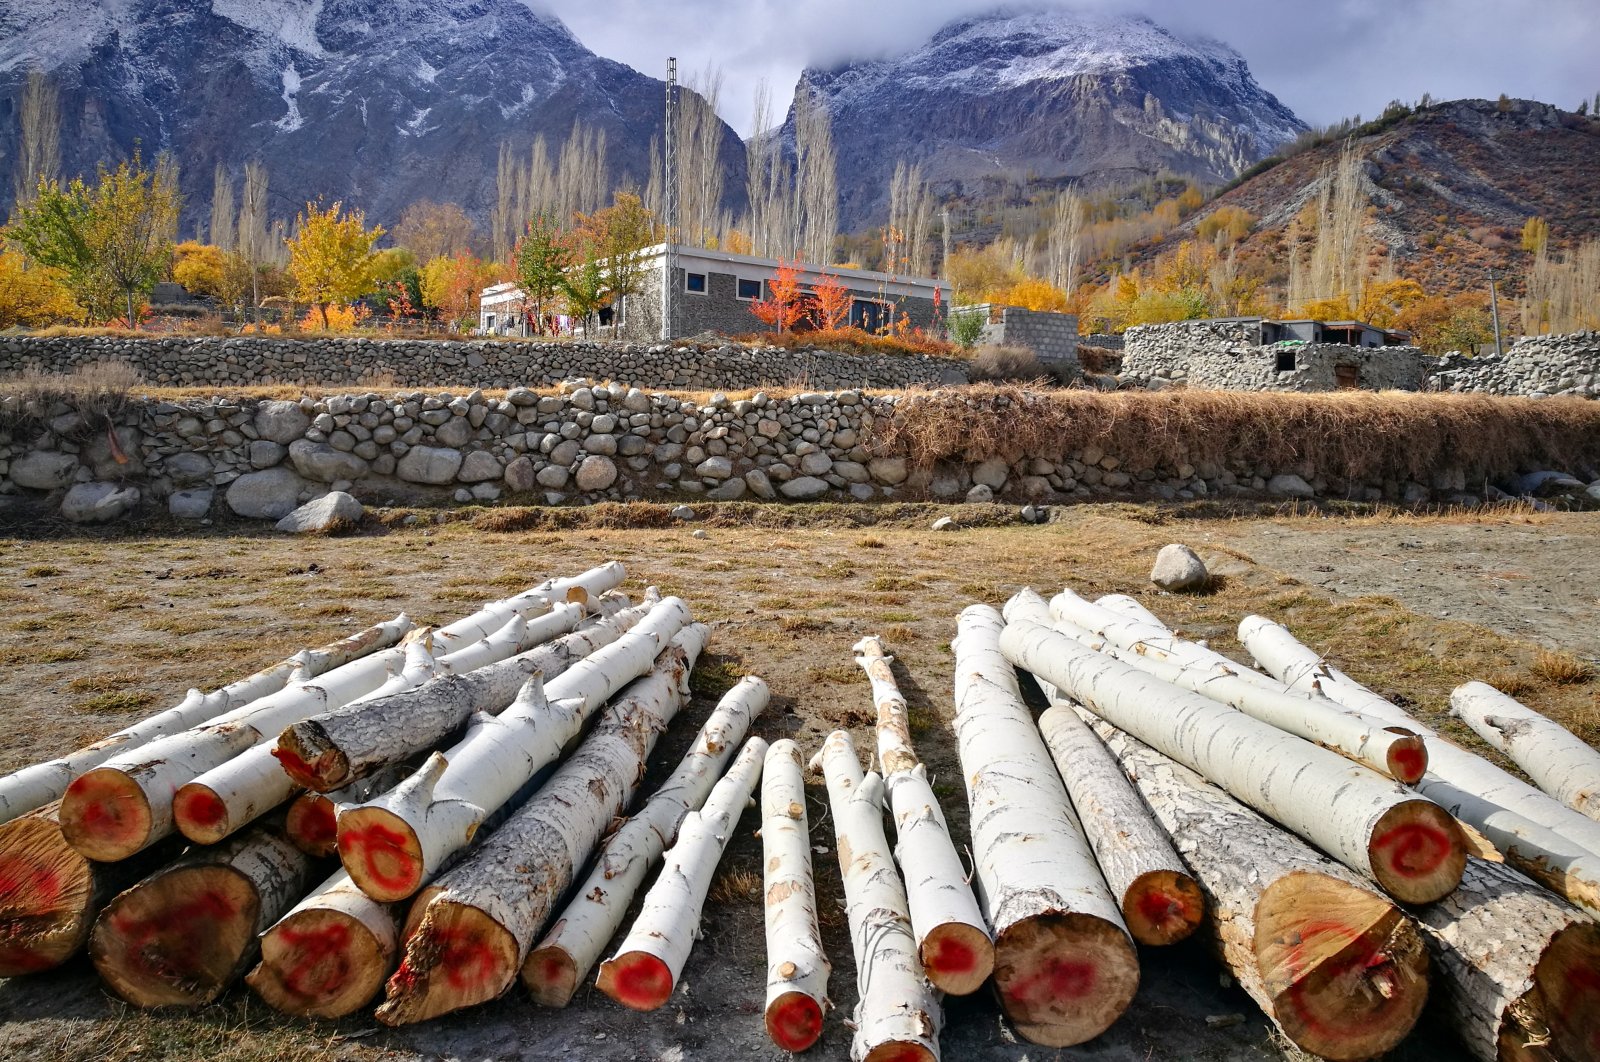 Tree logs cut down from nearby forests and gathered together, lay in the garden of a house in the Hunza and Gulmit valley located in the Gilgit-Baltistan region, northern Pakistan. (Shutterstock Photo)